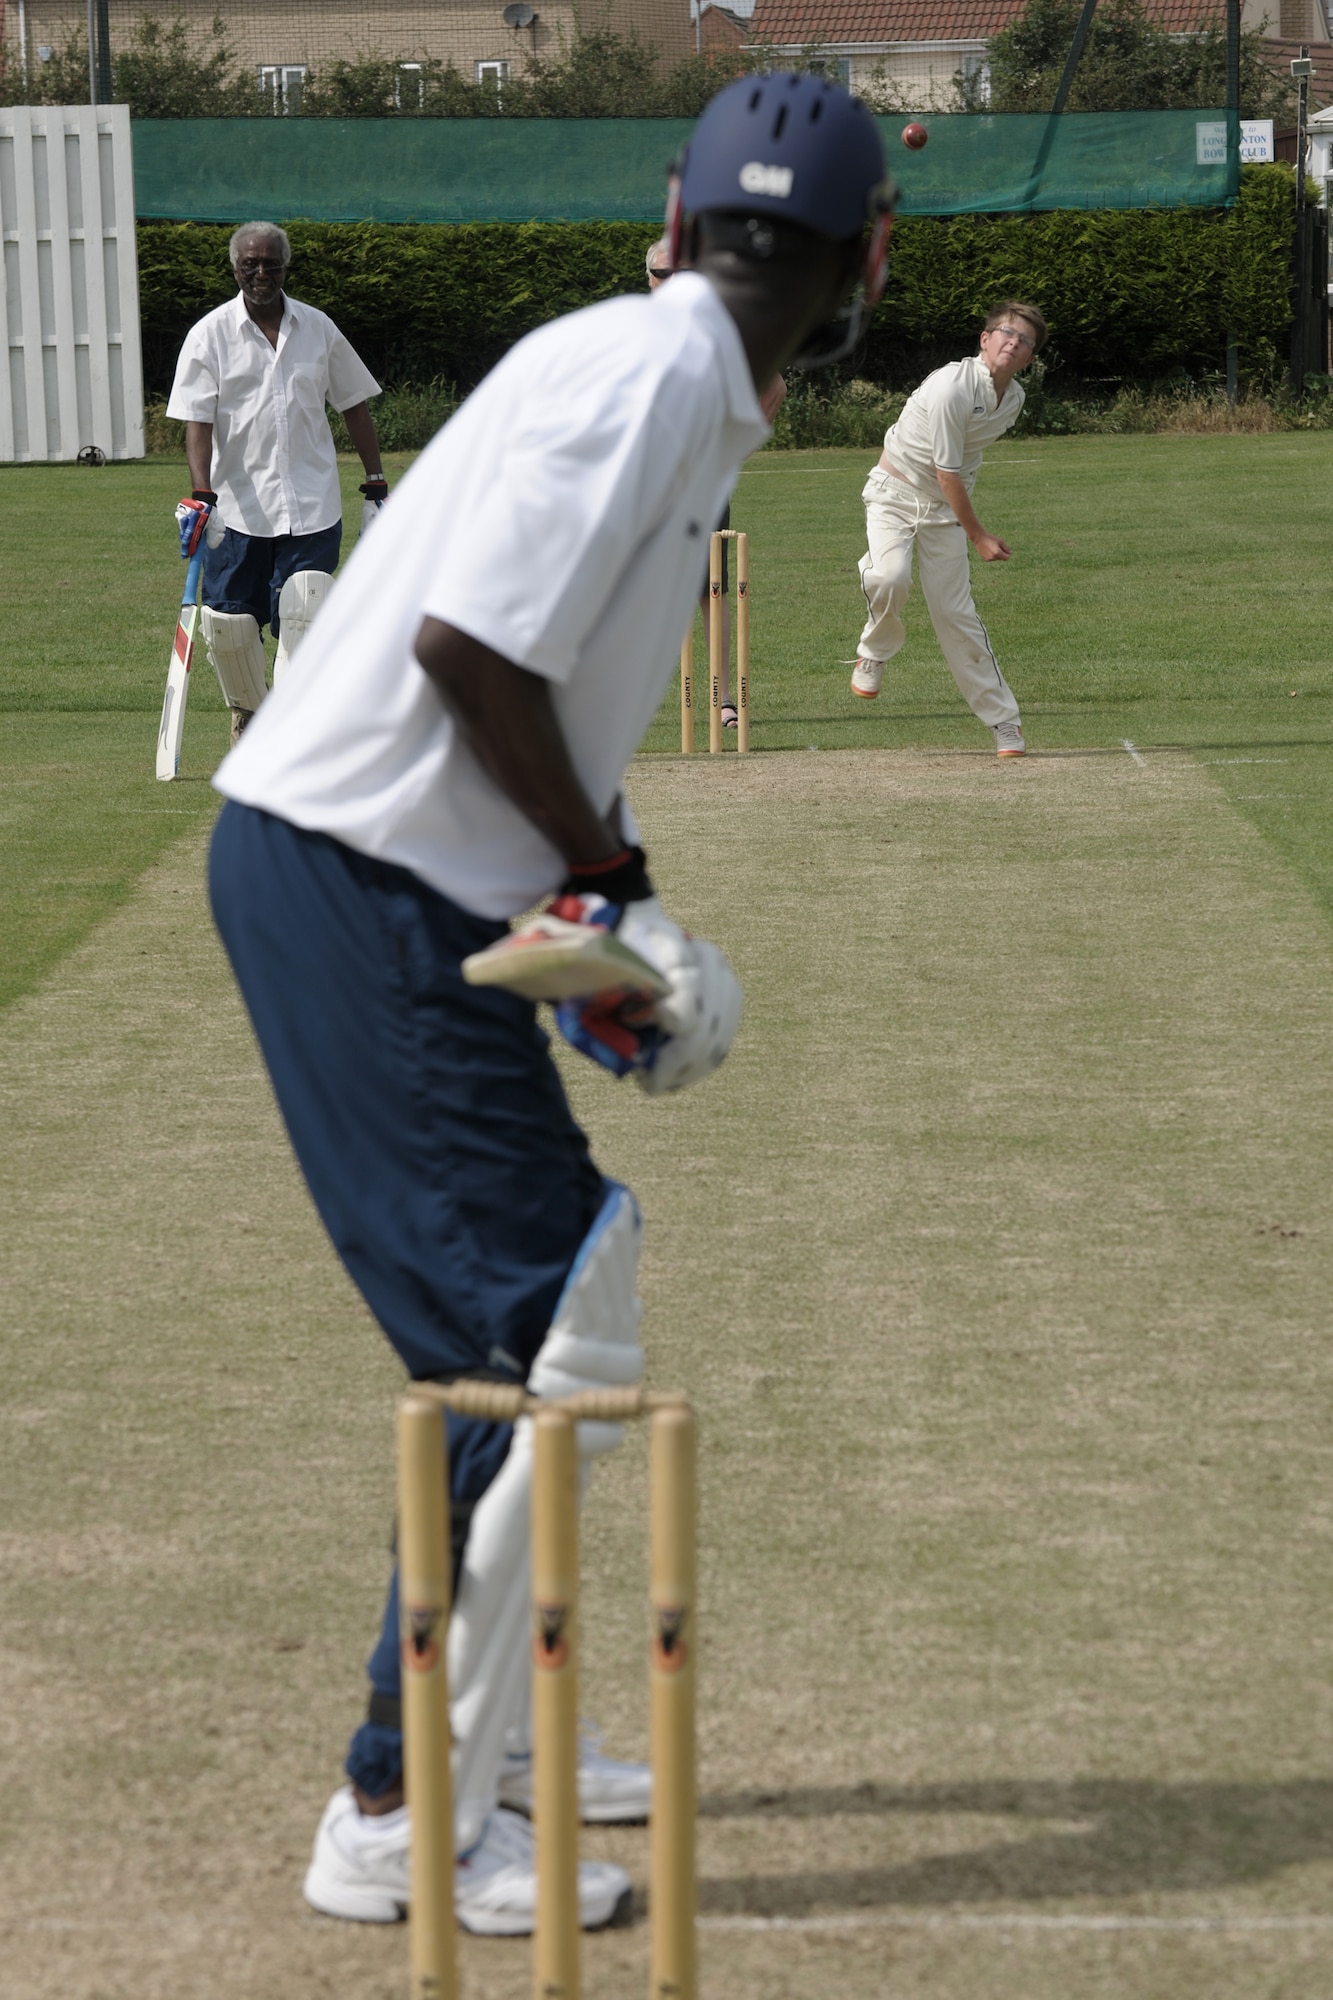 LONGSTANTON, United Kingdom – Tech. Sgt. Quami King, 423rd Medical Squadron, keeps his eyes on the ball that was bowled by the Longstanton Grasshopper during the first game played by the team Aug. 19 at Longstanton Bowls Club in Longstanton, United Kingdom. Behind each batsman is a target called a wicket. One designated member of the fielding team, the bowler, is given a ball and attempts to bowl the ball from one end of the pitch to the wicket behind the batsman on the other side of the pitch. The batsman tries to prevent the ball from hitting the wicket by striking the ball with a bat. If the bowler succeeds in hitting the wicket, or if the ball, after being struck by the batsman, is caught by the fielding team before it touches the ground, the batsman is dismissed. (U.S. Air Force photo by Master Sgt. John Barton)